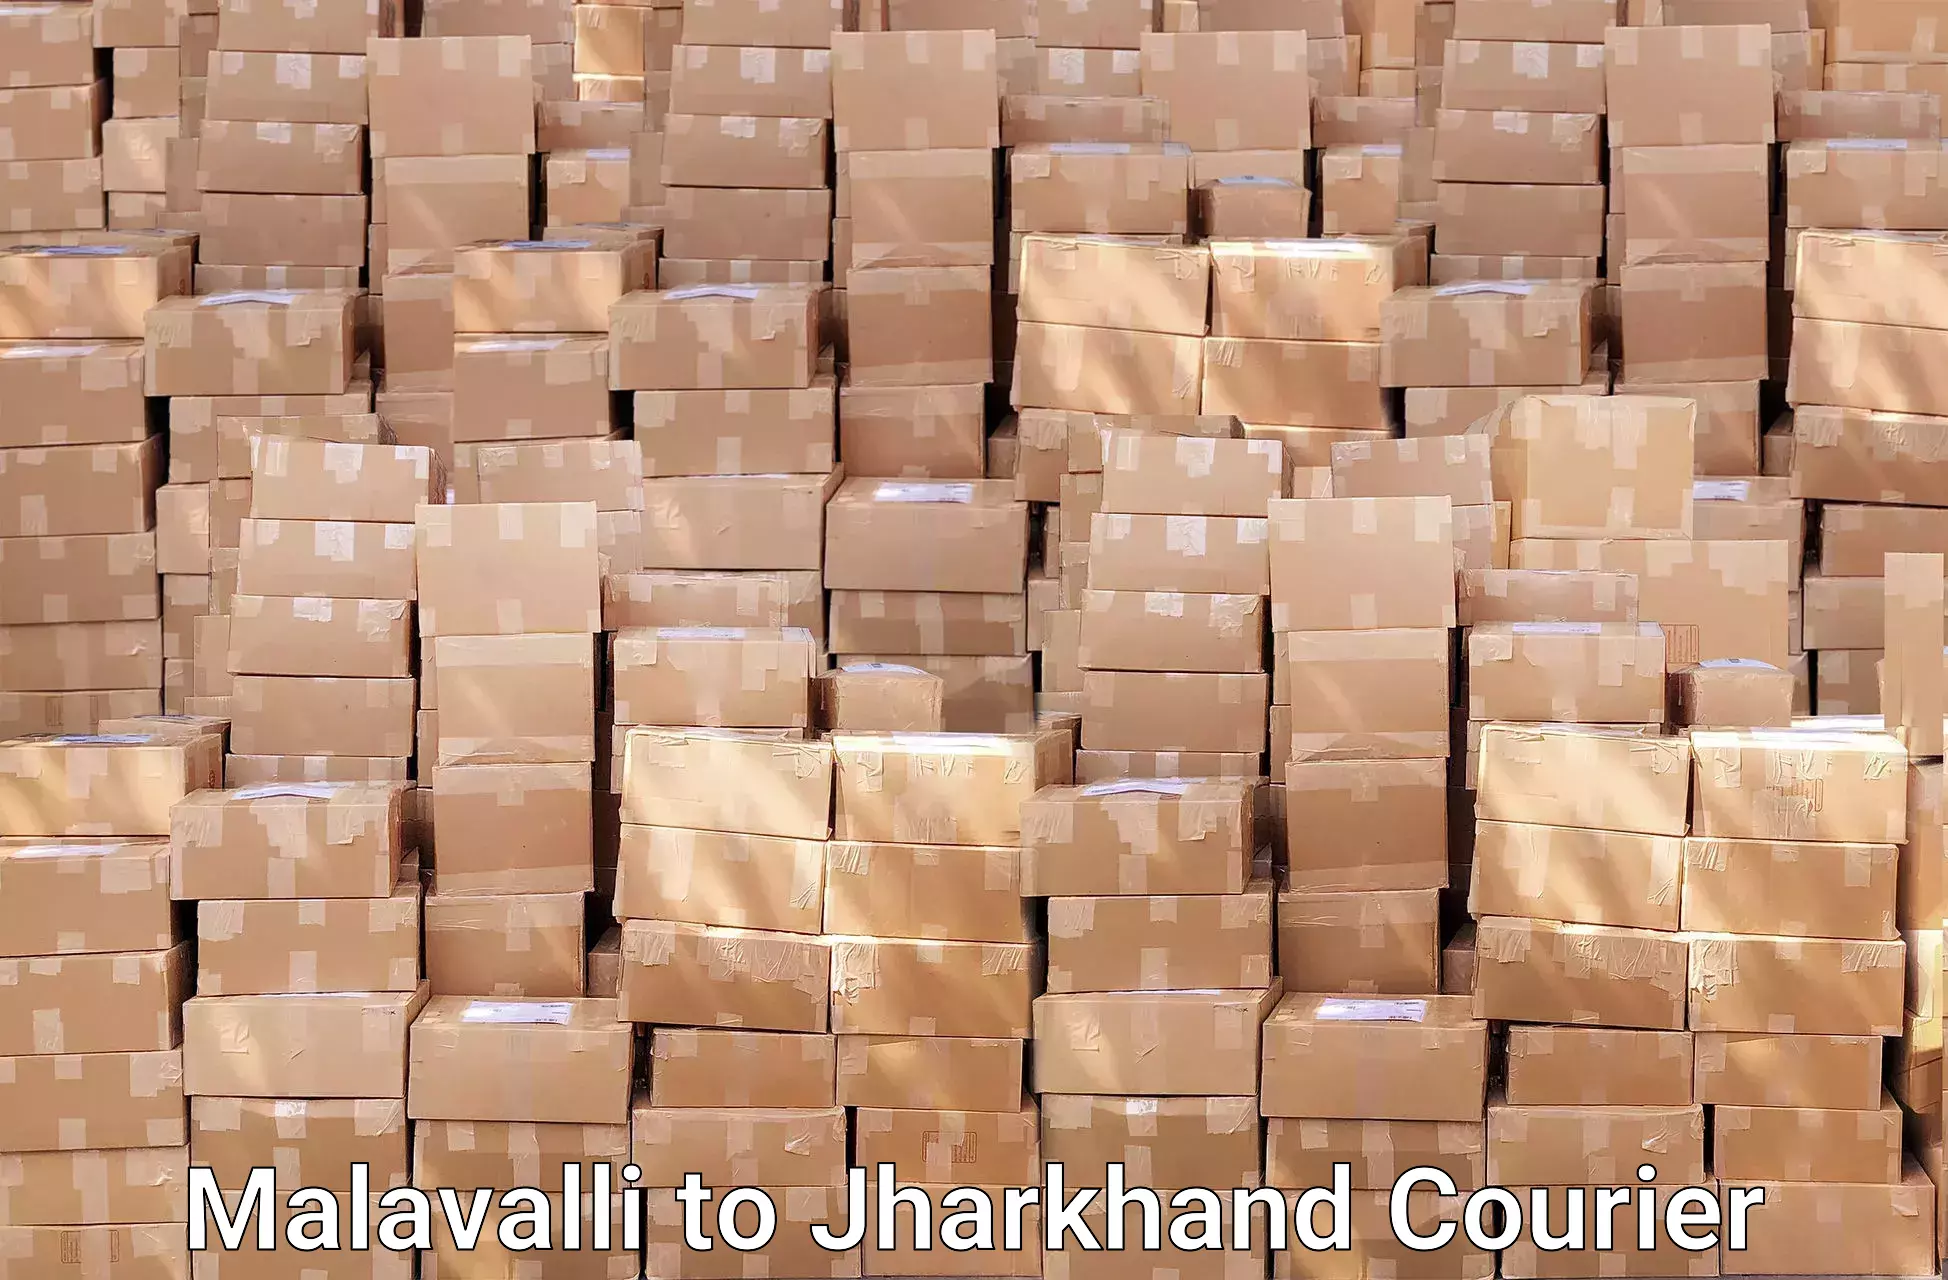 Moving and storage services in Malavalli to Ranchi